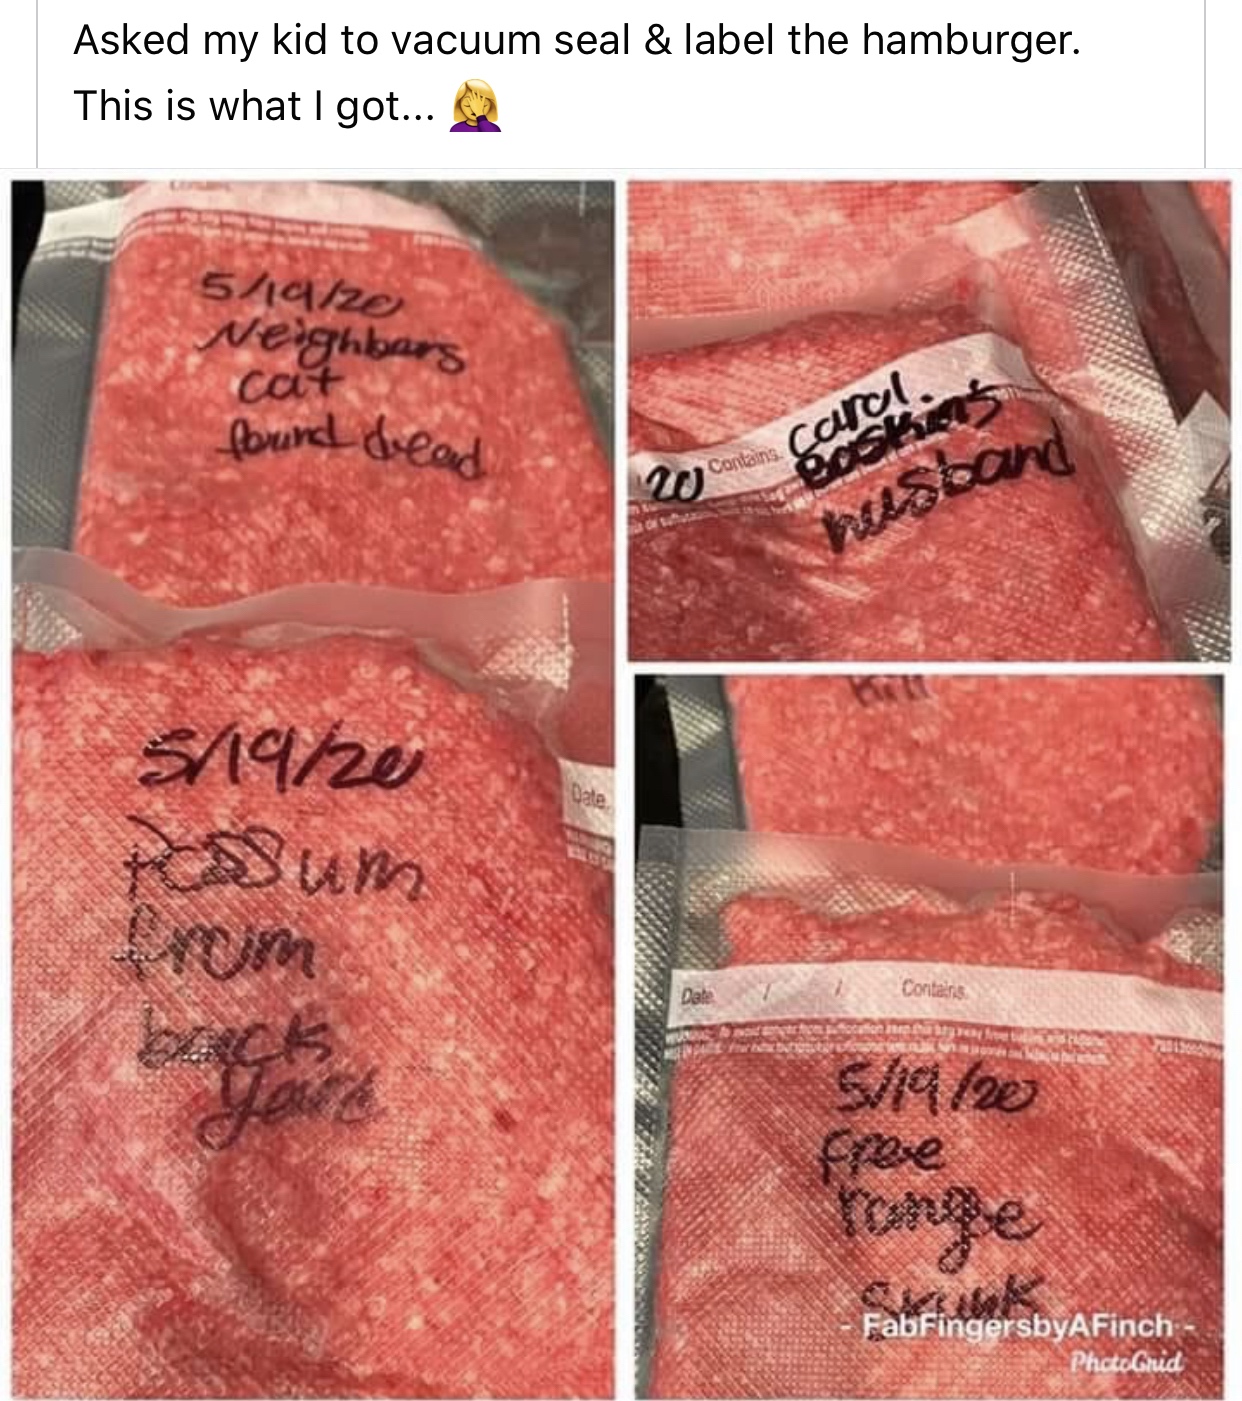 kobe beef - seth Asked my kid to vacuum seal & label the hamburger. This is what I got... 51920 Neighbors cat found dead husband 5419720 tussum Acas your 51920 fibie tronge FabFingersbyAFinch Price